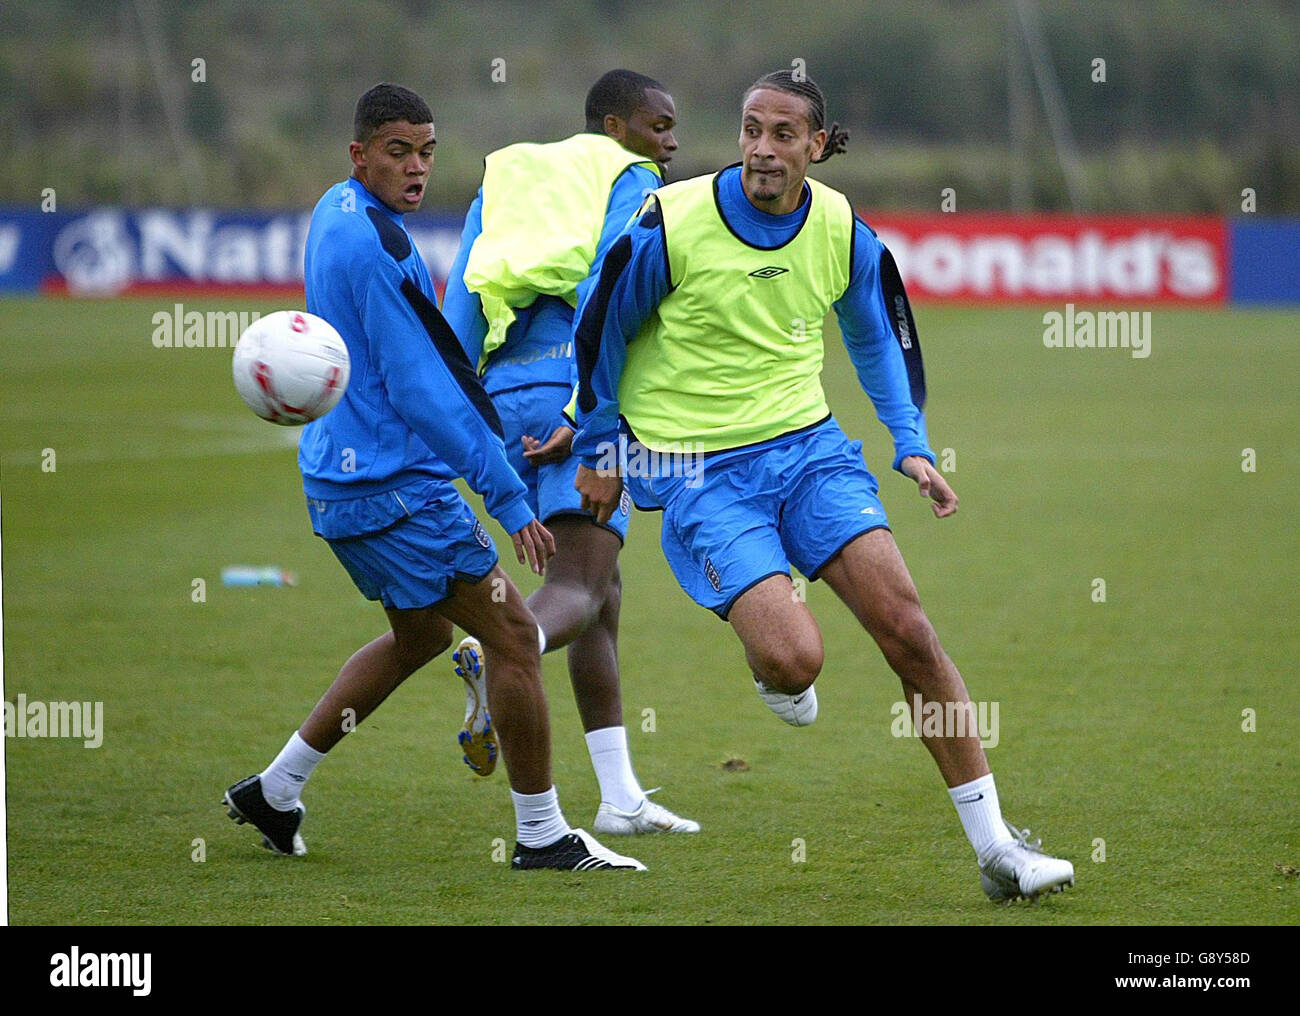 England's Rio Ferdinand (R) gets past team-mate Jermaine Jenas (L) during a training session at Carrington Training Ground, Manchester, Tuesday October 4, 2005. England play Austria in their World Cup qualifying match on Saturday. PRESS ASSOCIATION Photo. Photo credit should read: Martin Rickett/PA. Stock Photo